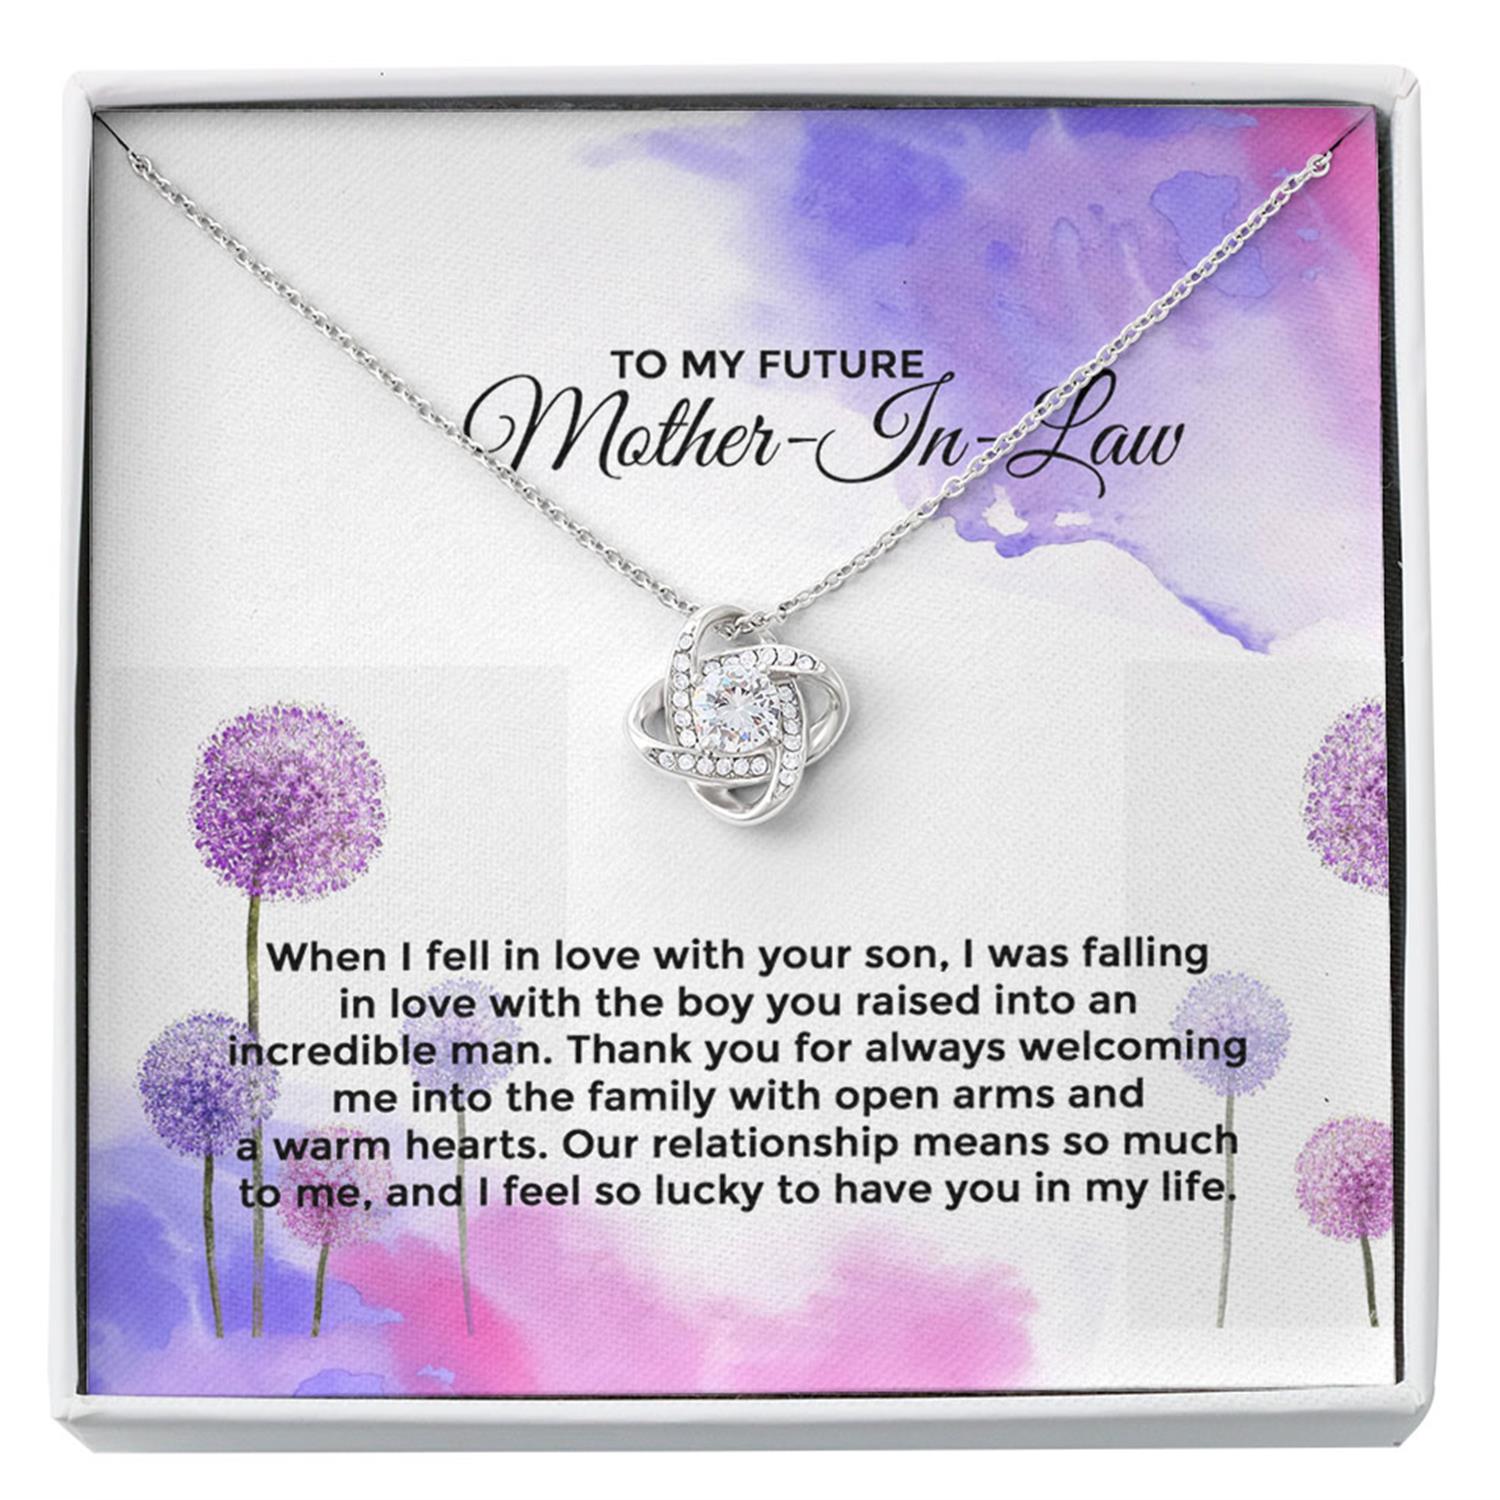 Mom Necklace, Mother-in-law Necklace, To My Future Mother-in-Law Necklace - Mothers Day Custom Necklace